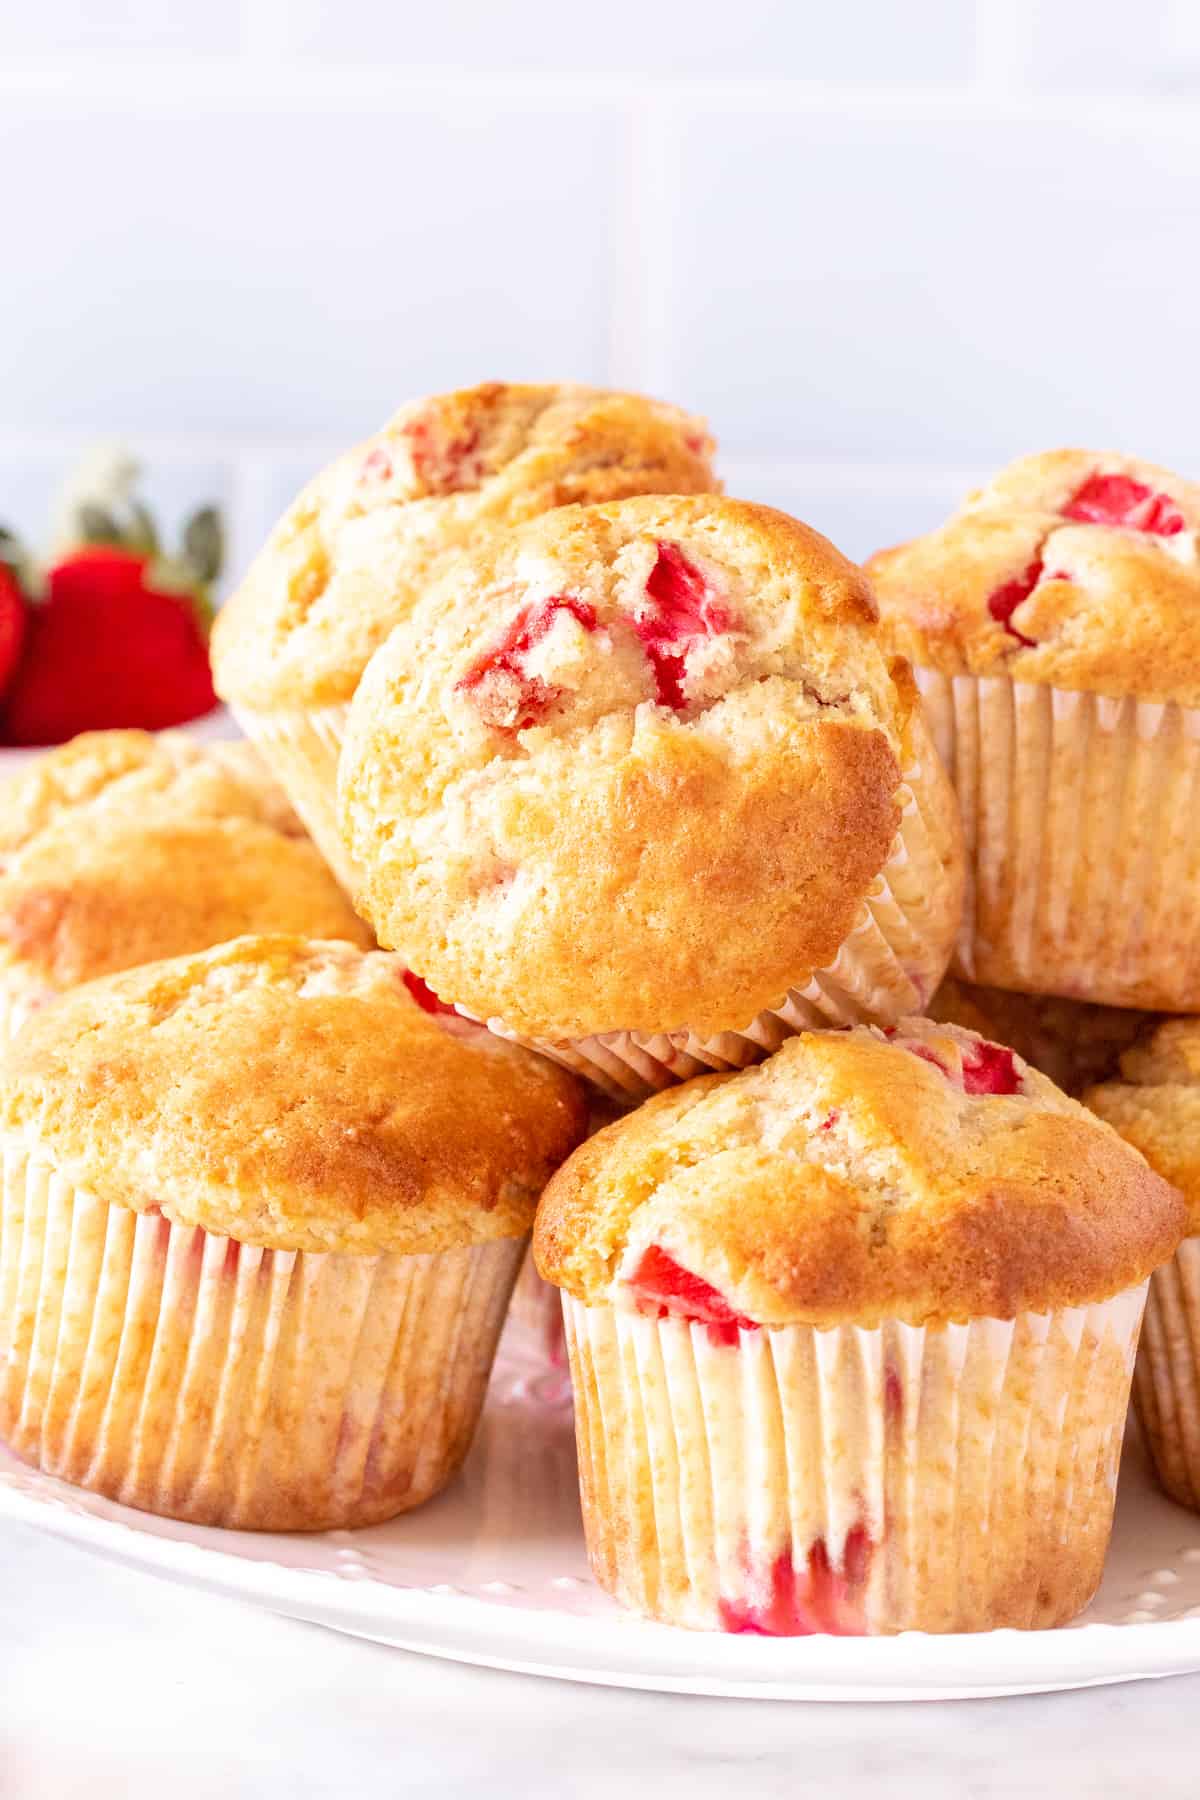 Plate of strawberry muffins